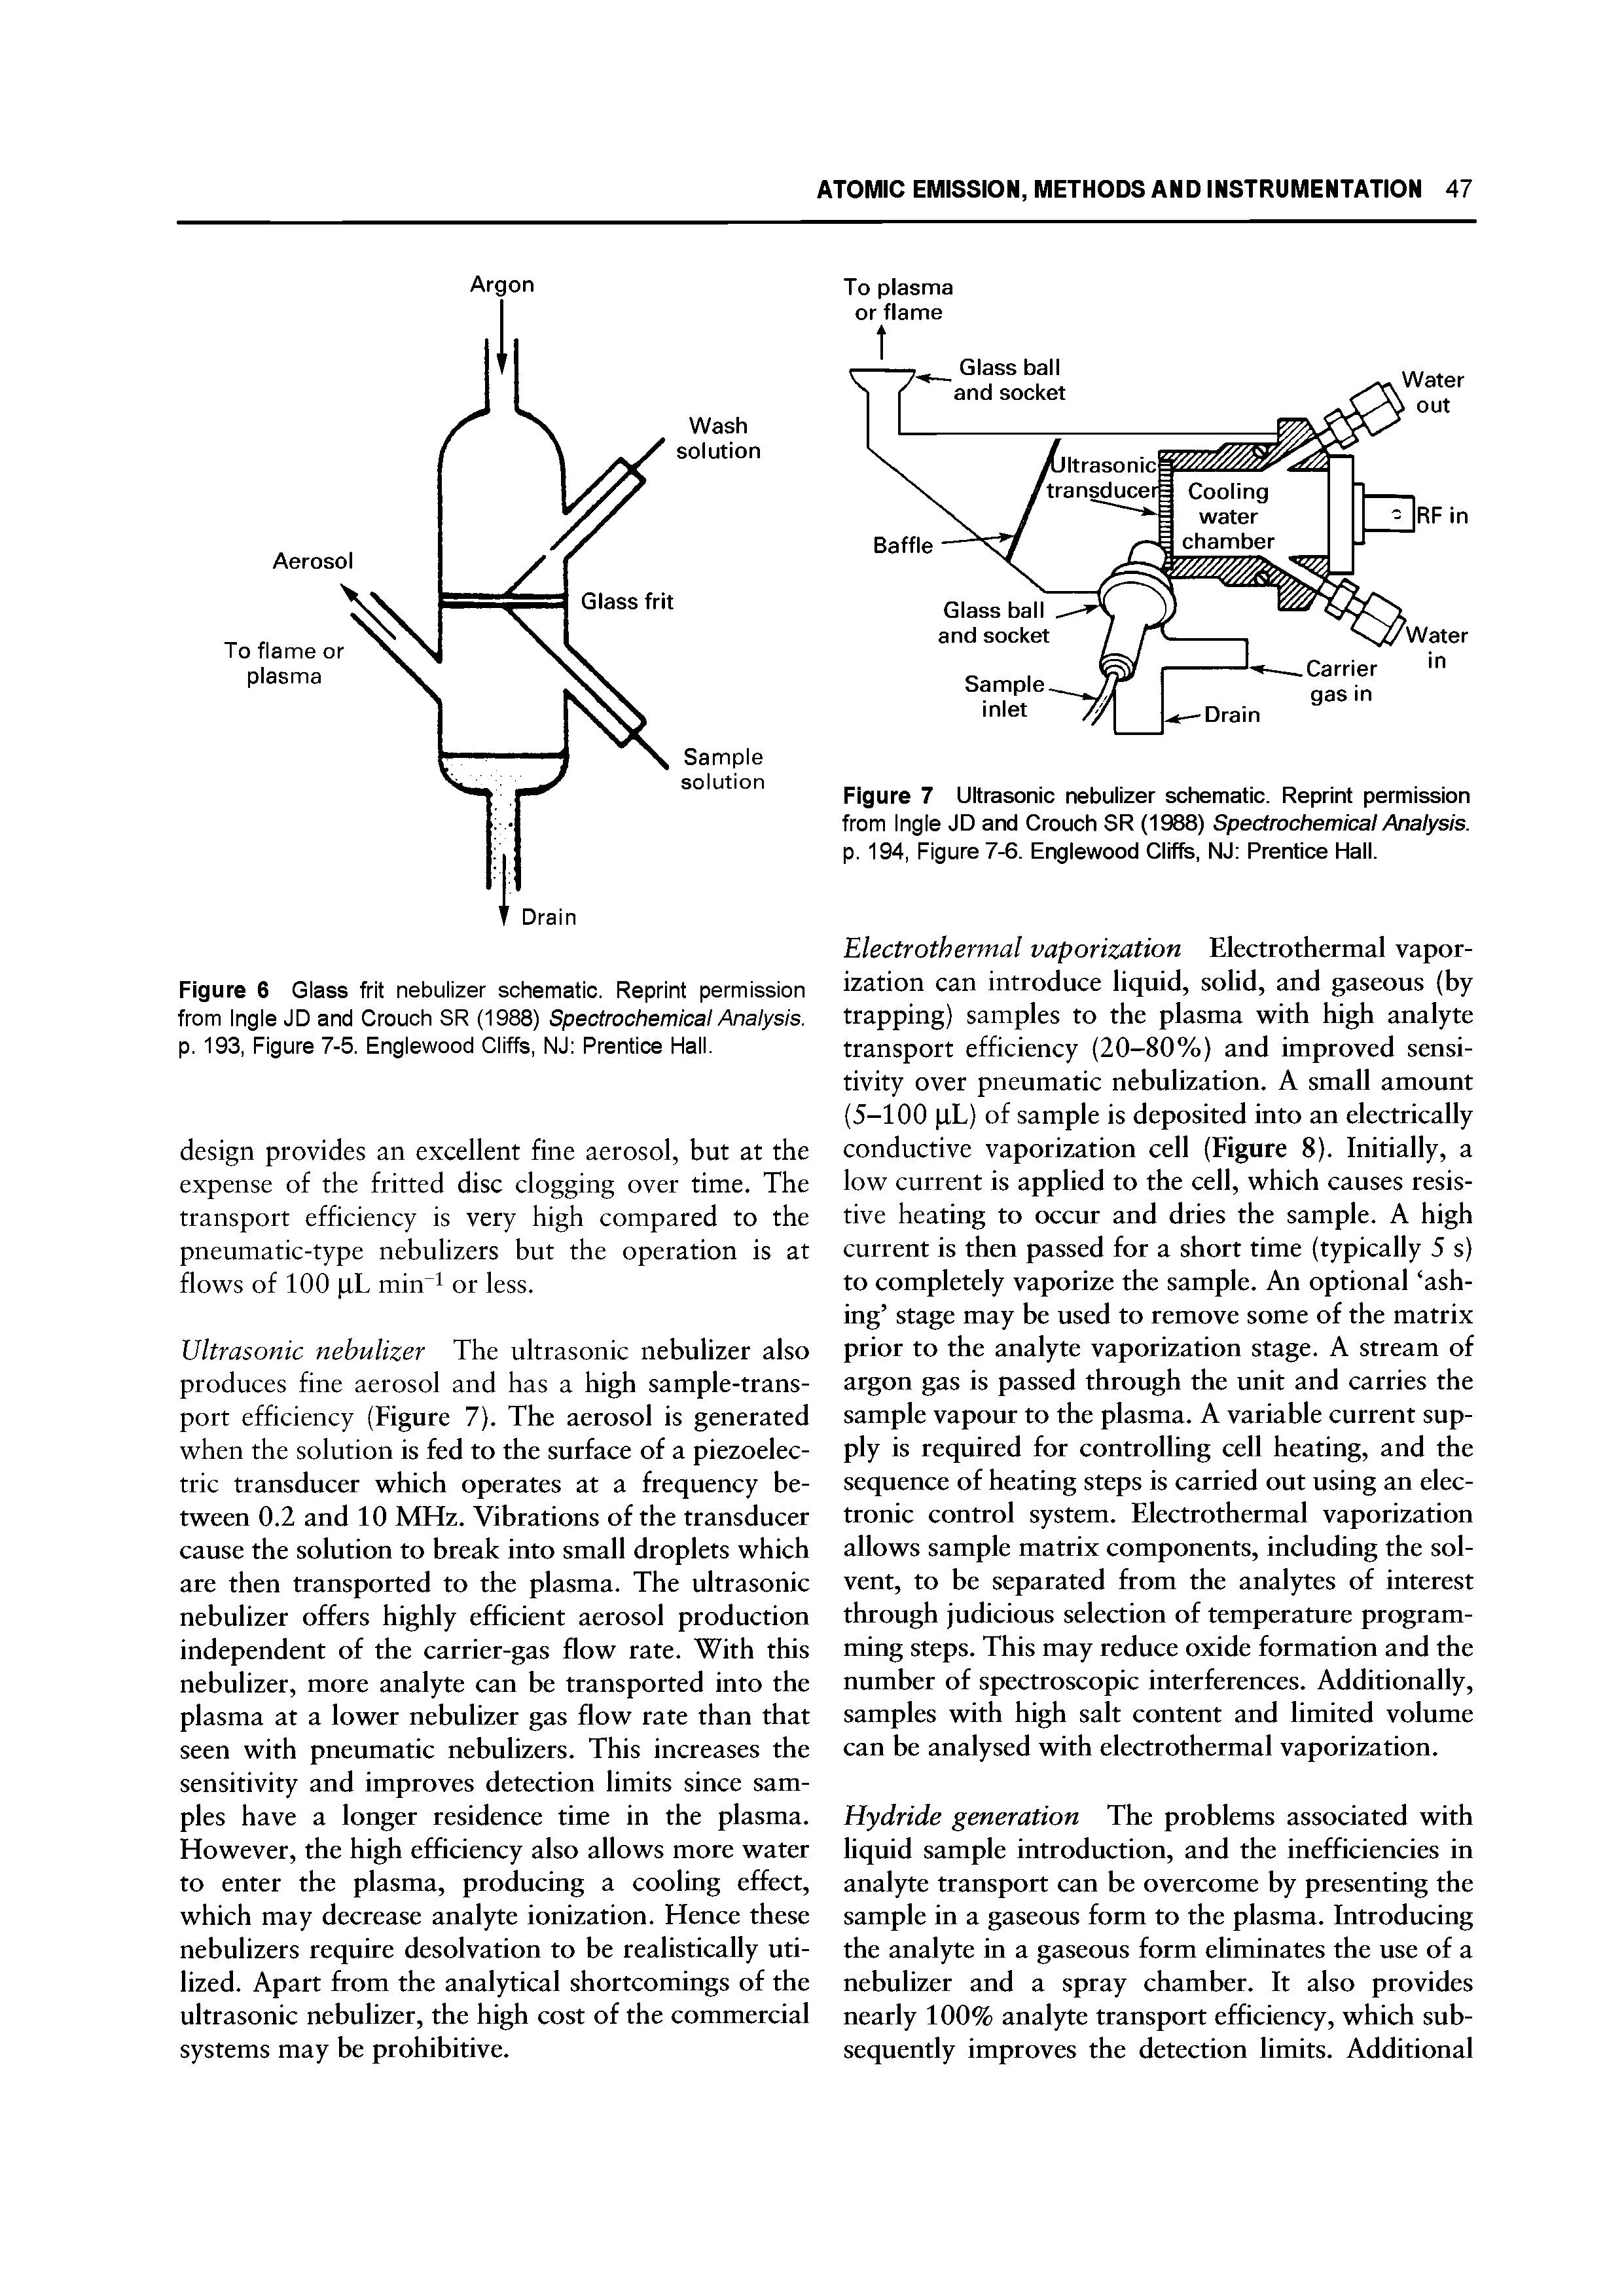 Figure 6 Glass frit nebulizer schematic. Reprint permission from Ingle JD and Crouch SR (1988) Spectrochemical Analysis. p. 193, Figure 7-5. Englewood Cliffs, NJ Prentice Hall.